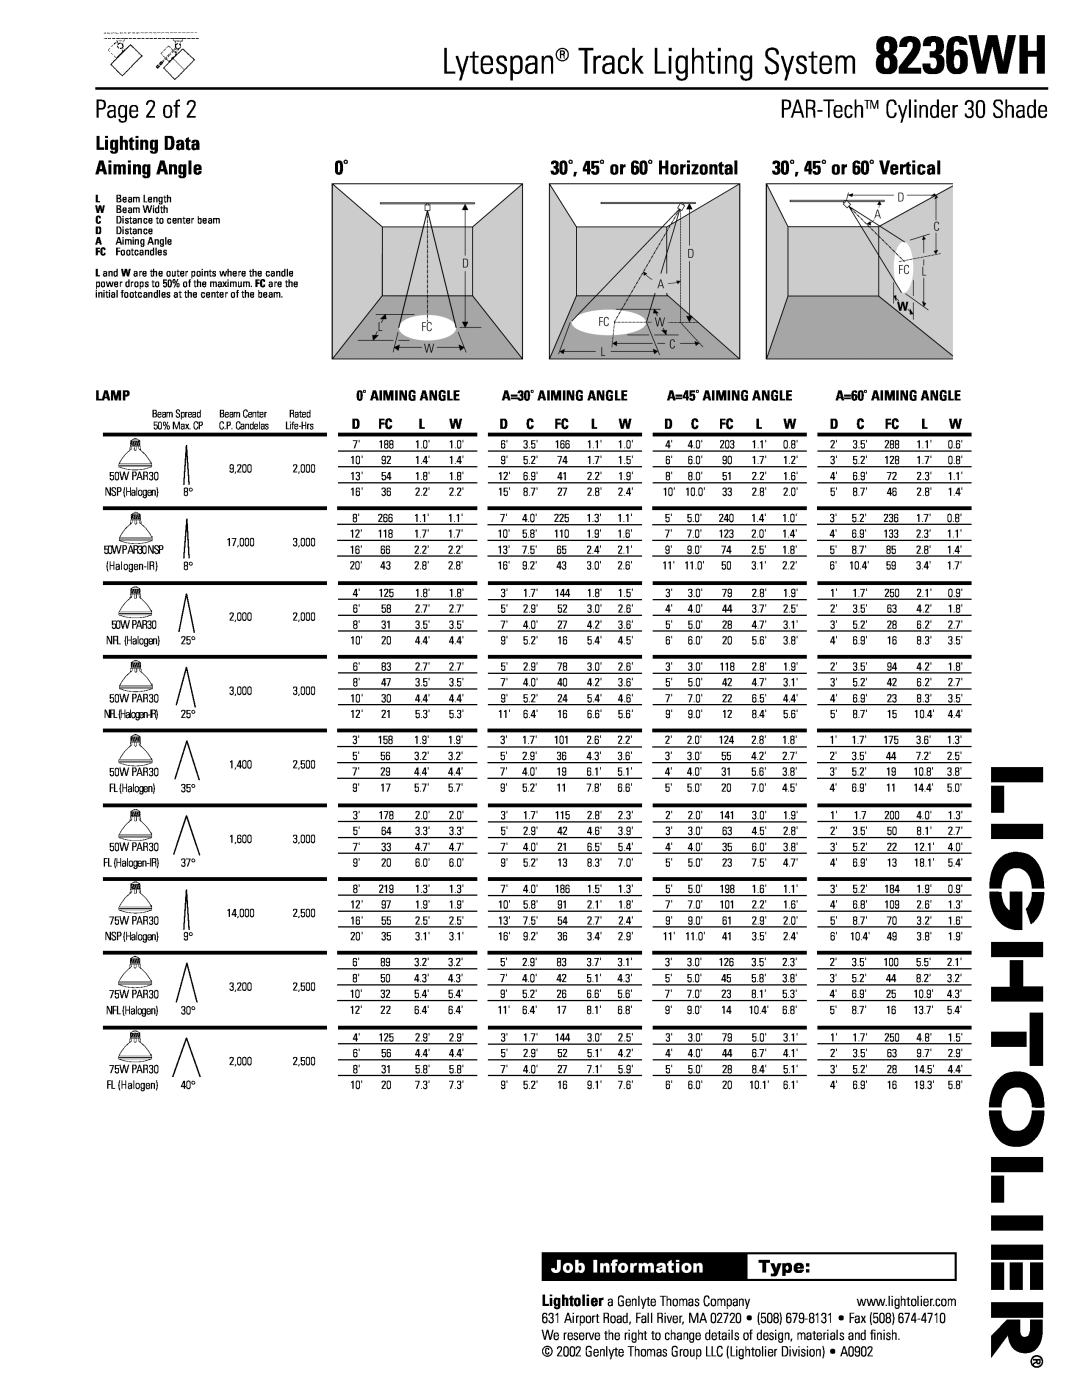 Lightolier 8236WH Page 2 of, Lighting Data, Aiming Angle, 30˚, 45˚ or 60˚ Horizontal, Type, PAR-TechTM Cylinder 30 Shade 